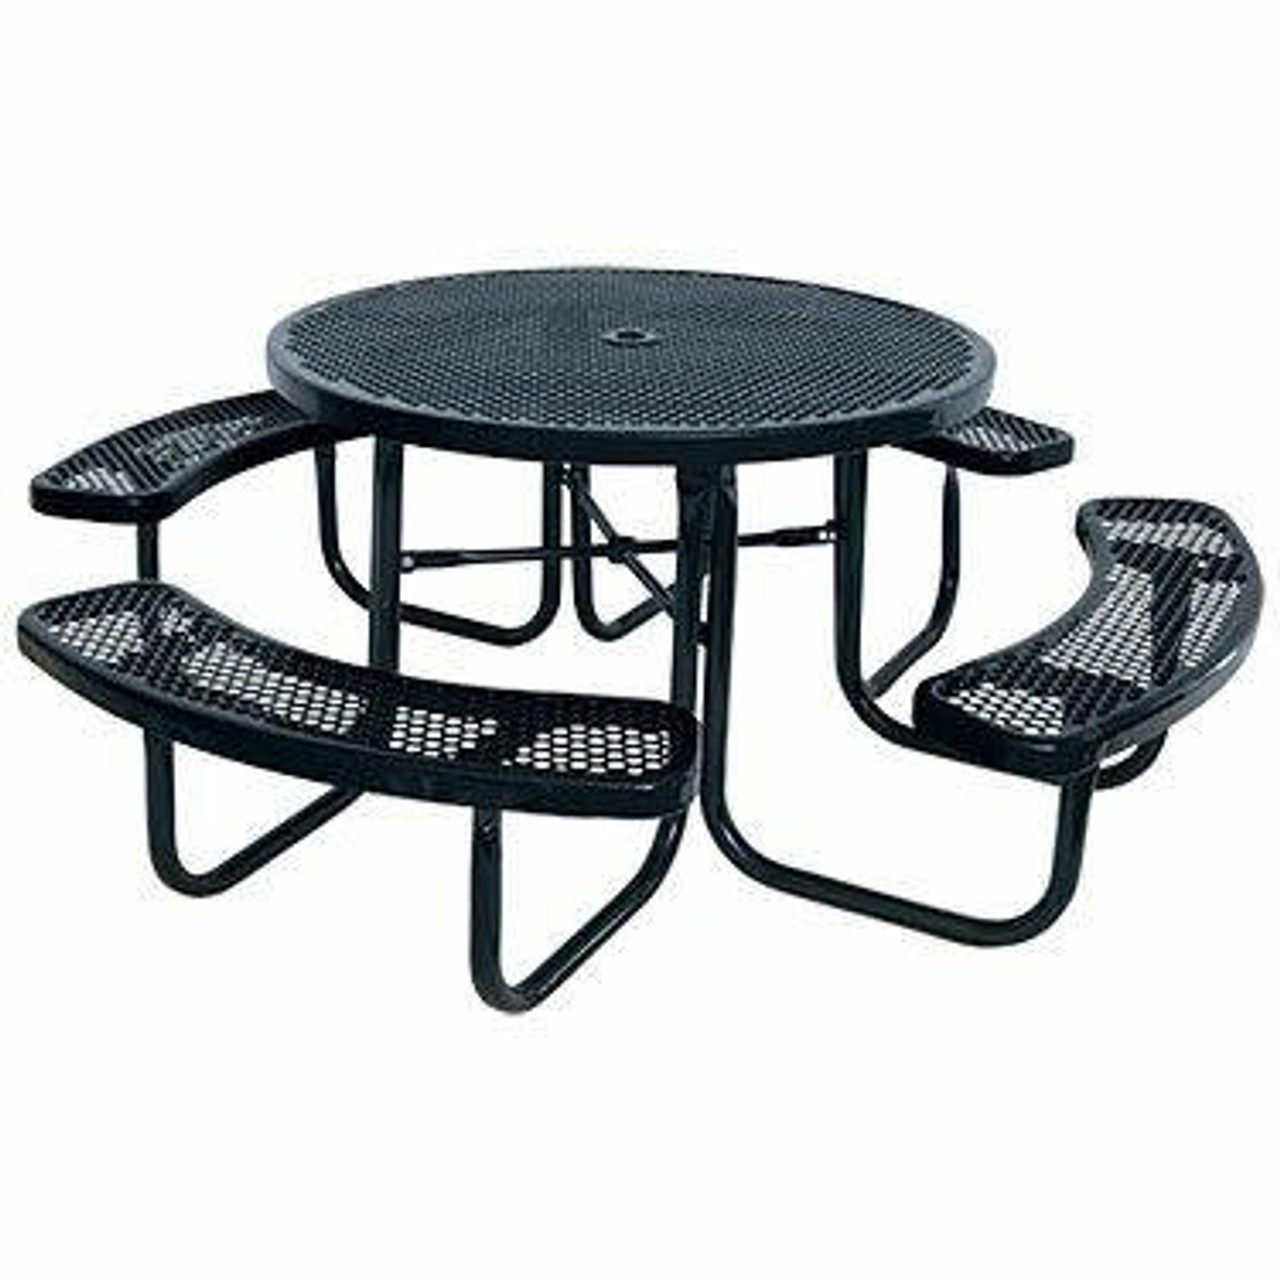 https://www.shifflerequip.com/education/furniture/outdoor-furniture-and-equipment/outdoor-picnic-tables/